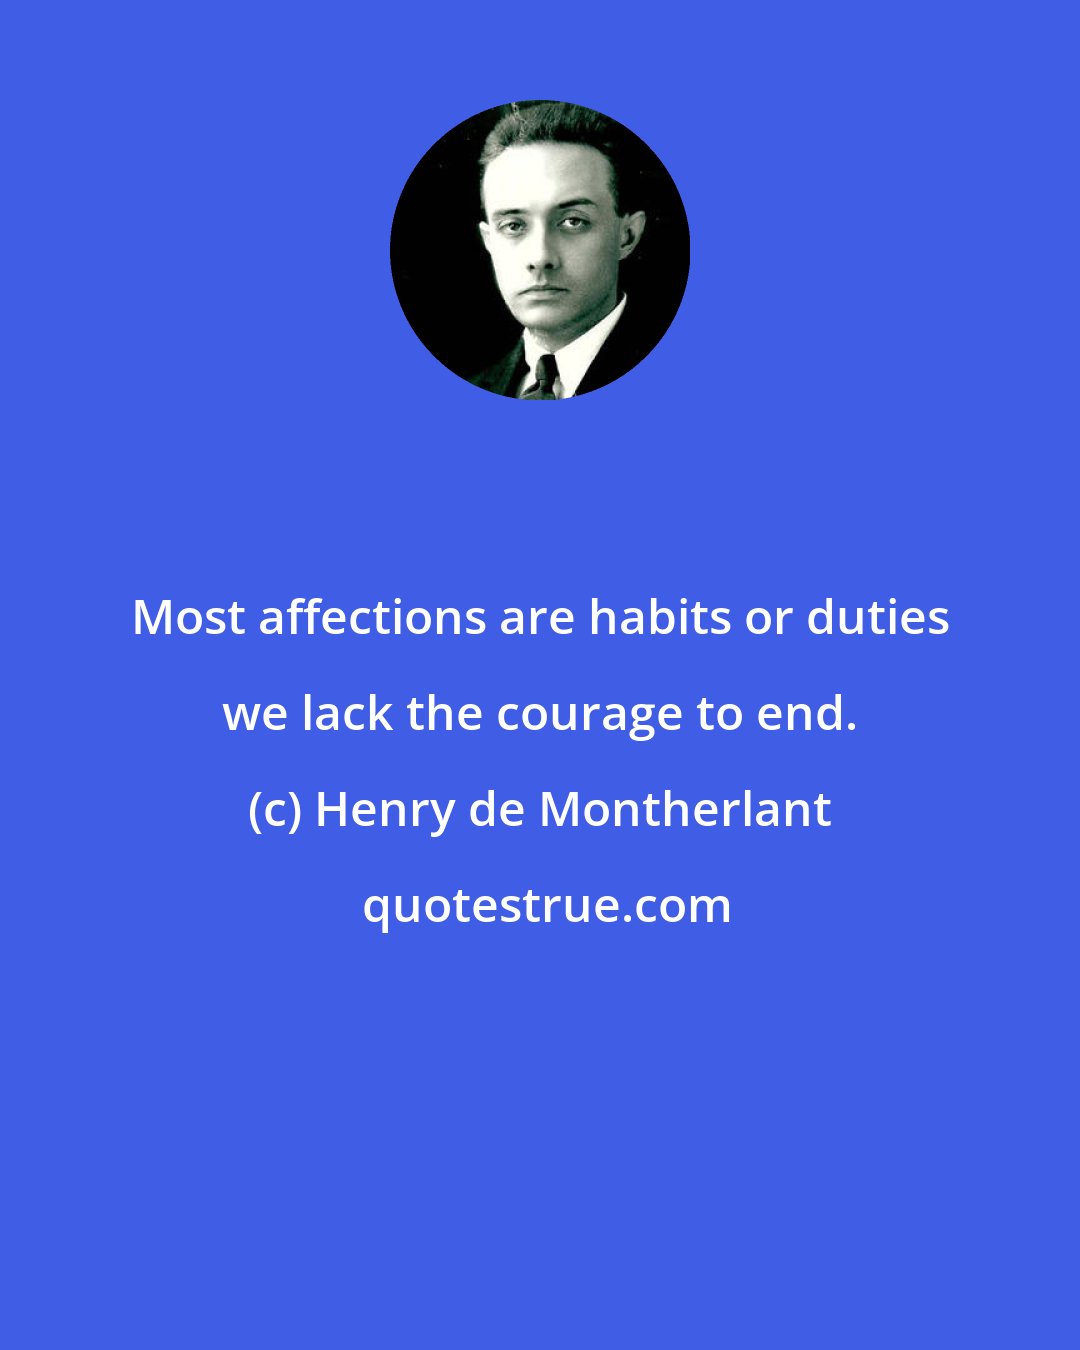 Henry de Montherlant: Most affections are habits or duties we lack the courage to end.